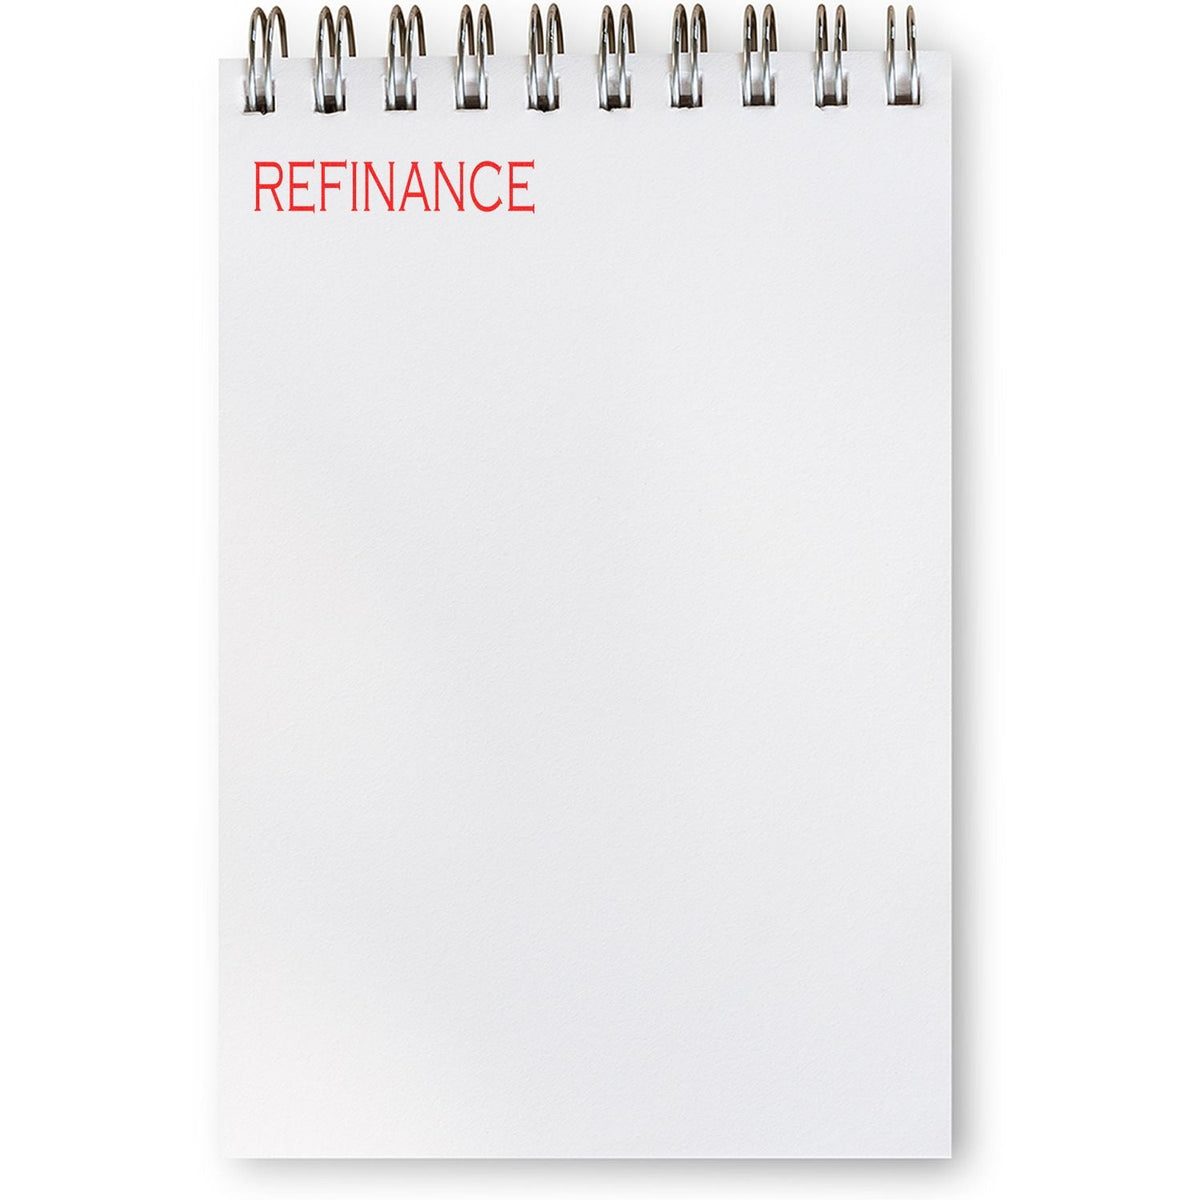 Self Inking Refinance Stamp In Use Photo